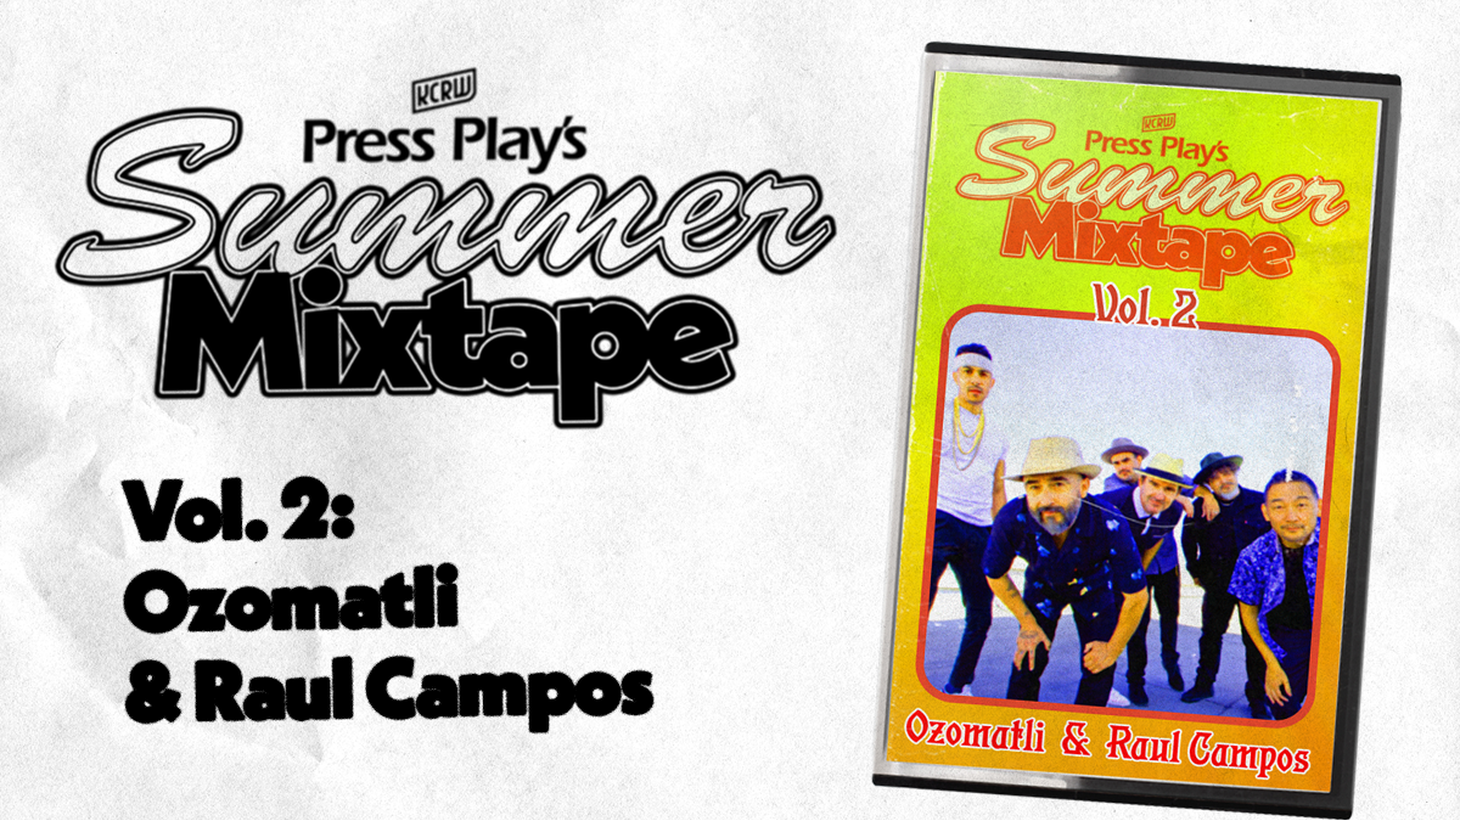 The second episode of this year’s Summer Mixtape features Ozomatli and Raul Campos.